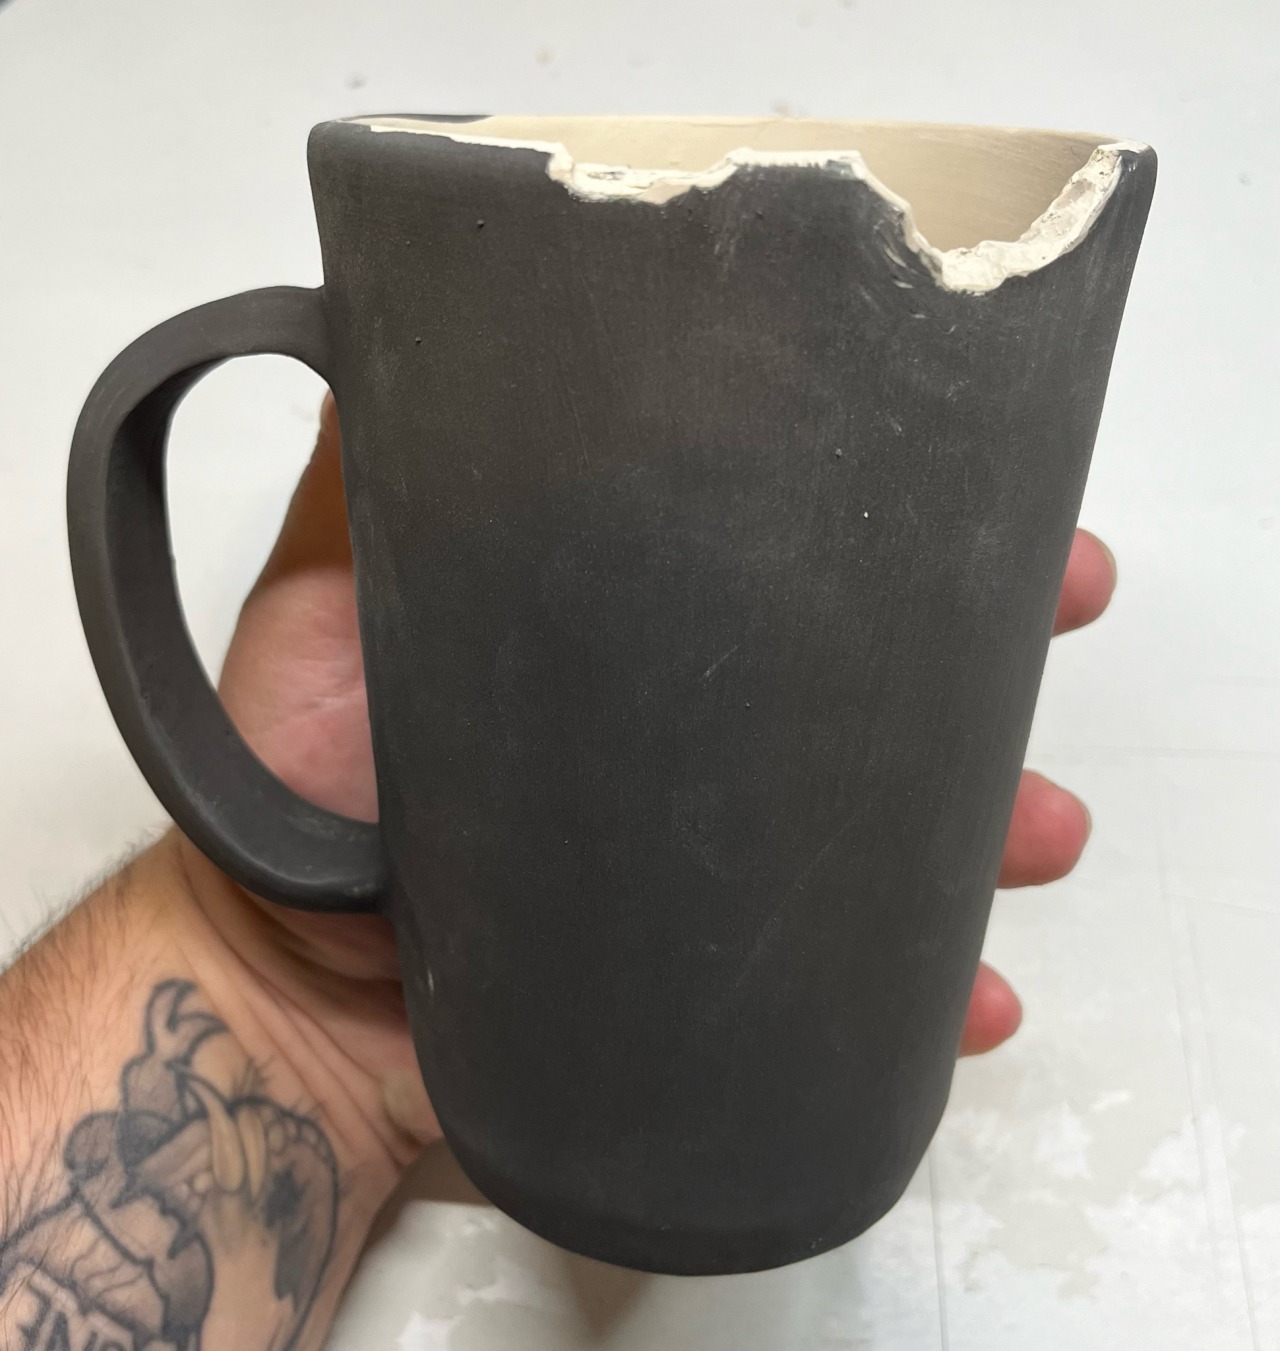 the other side of the mug. there are two bites out of the rim